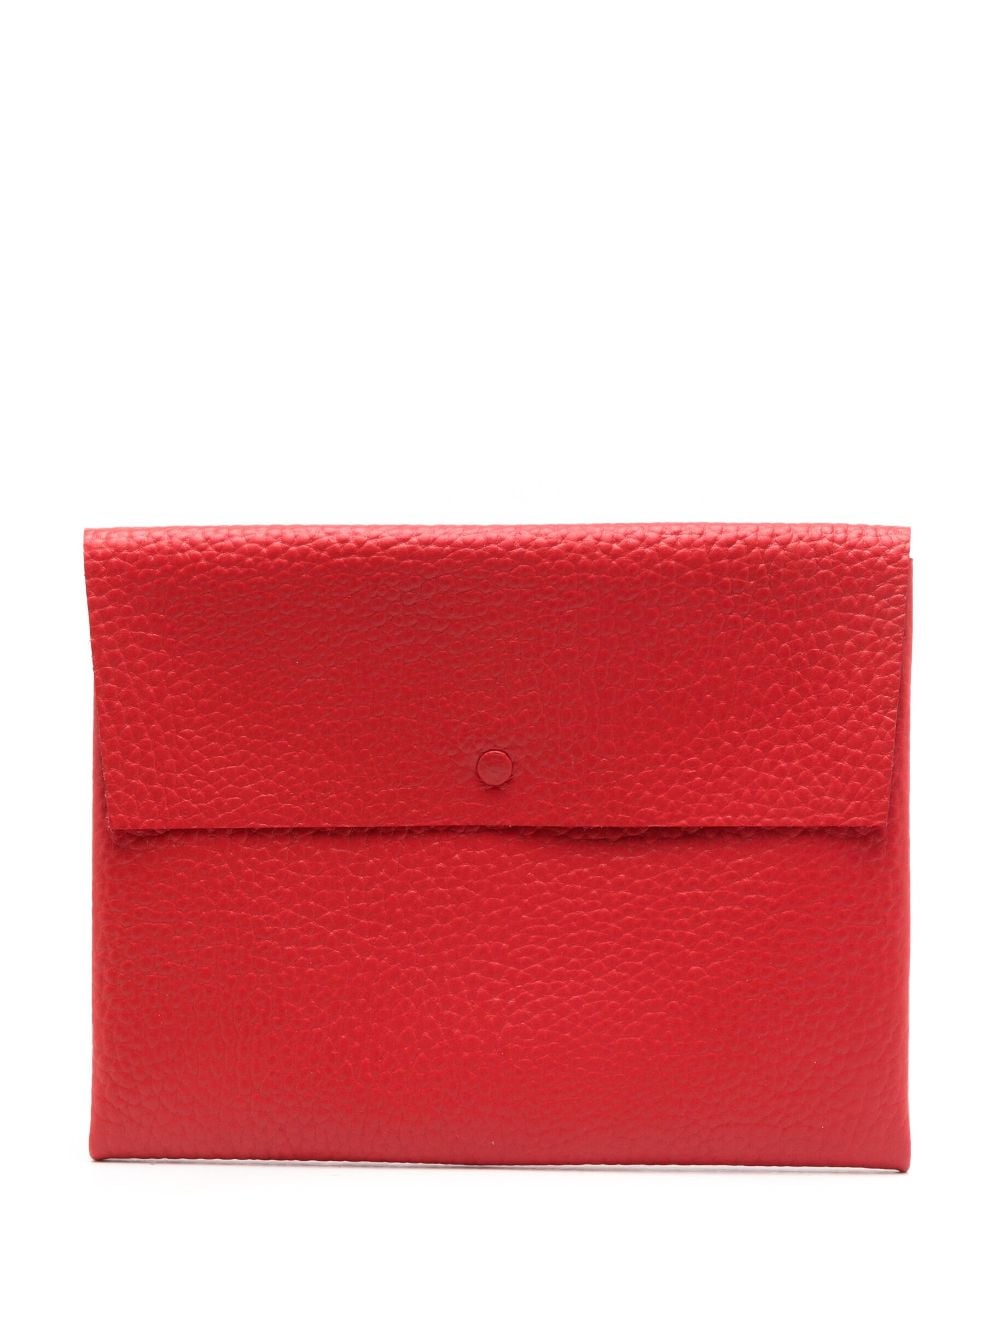 Sarah Chofakian Grained-texture Leather Case In Red